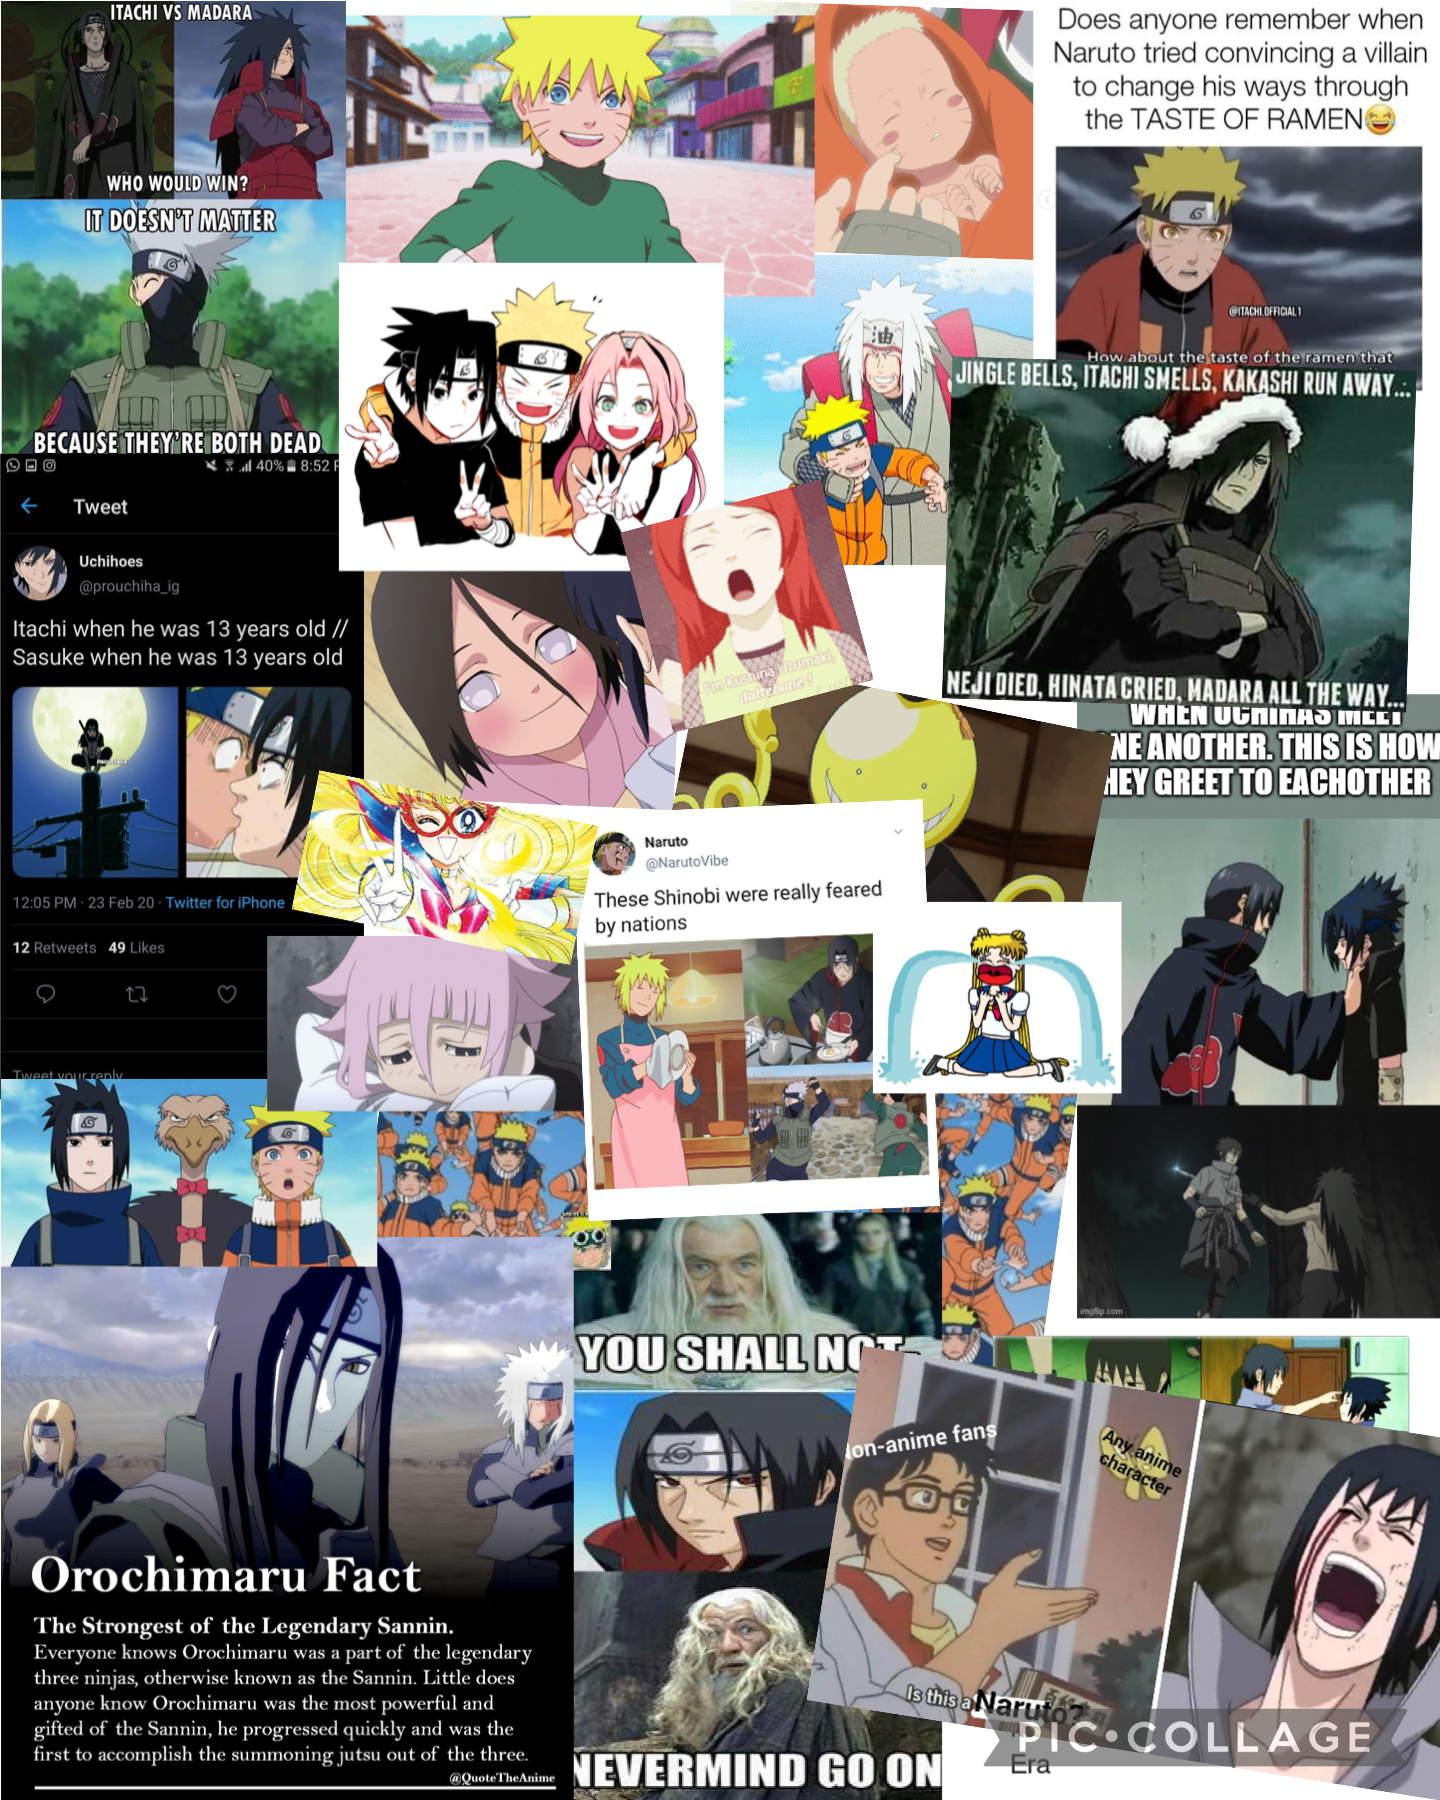 Idk what to post so I just put together a random collage of naruto (and a litttle bit of other anime)